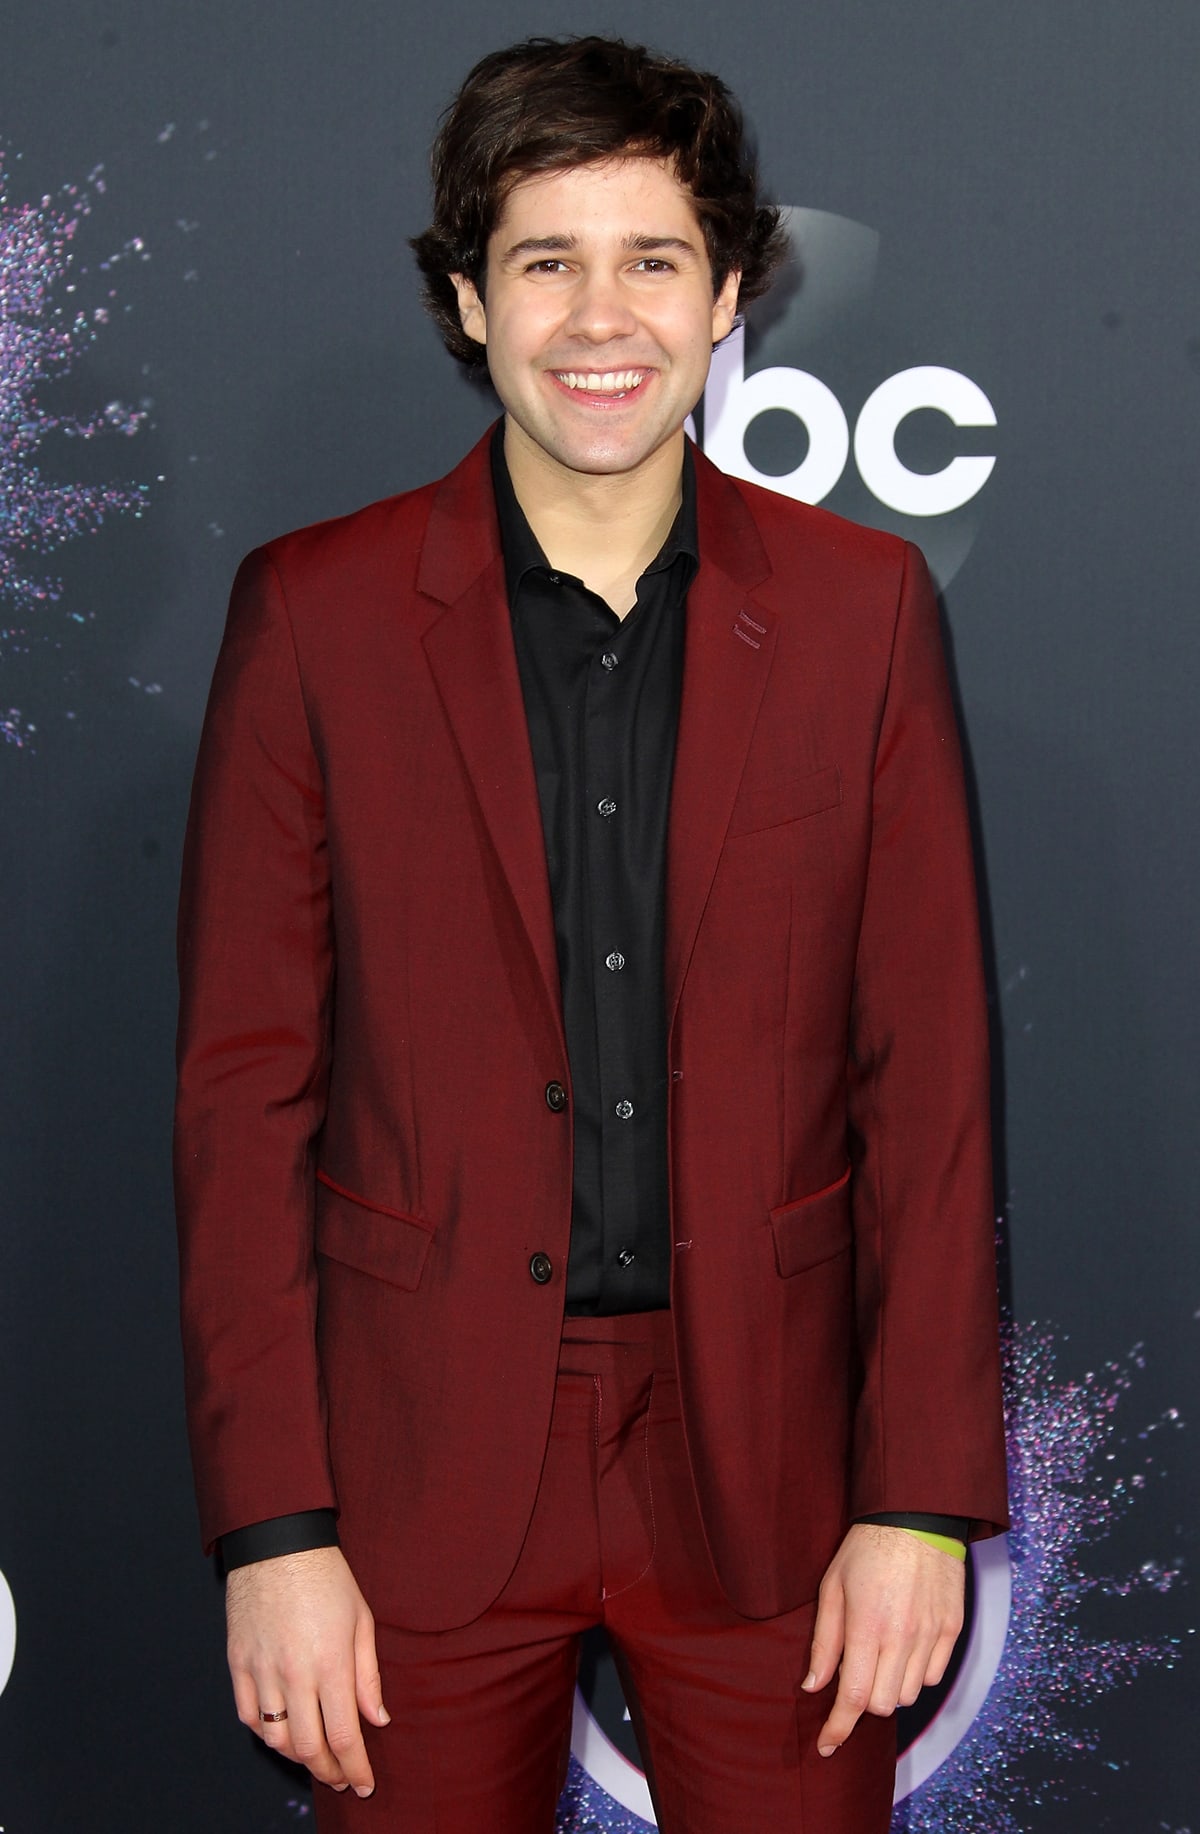 David Dobrik in a maroon suit at the 2019 American Music Awards